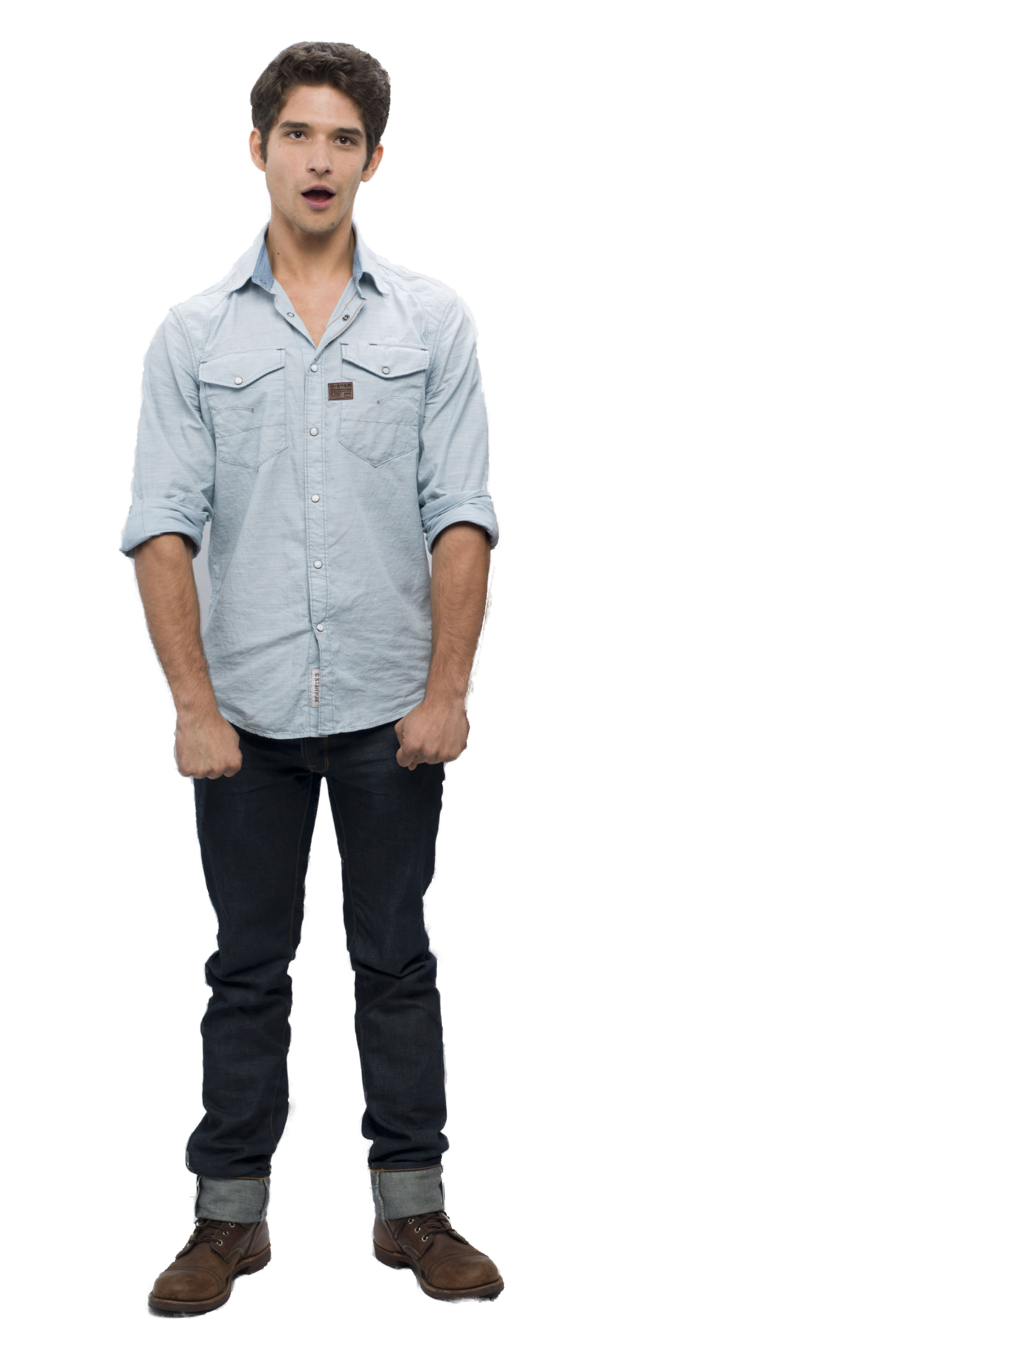 Tyler Posey TW 2 PNG by valer